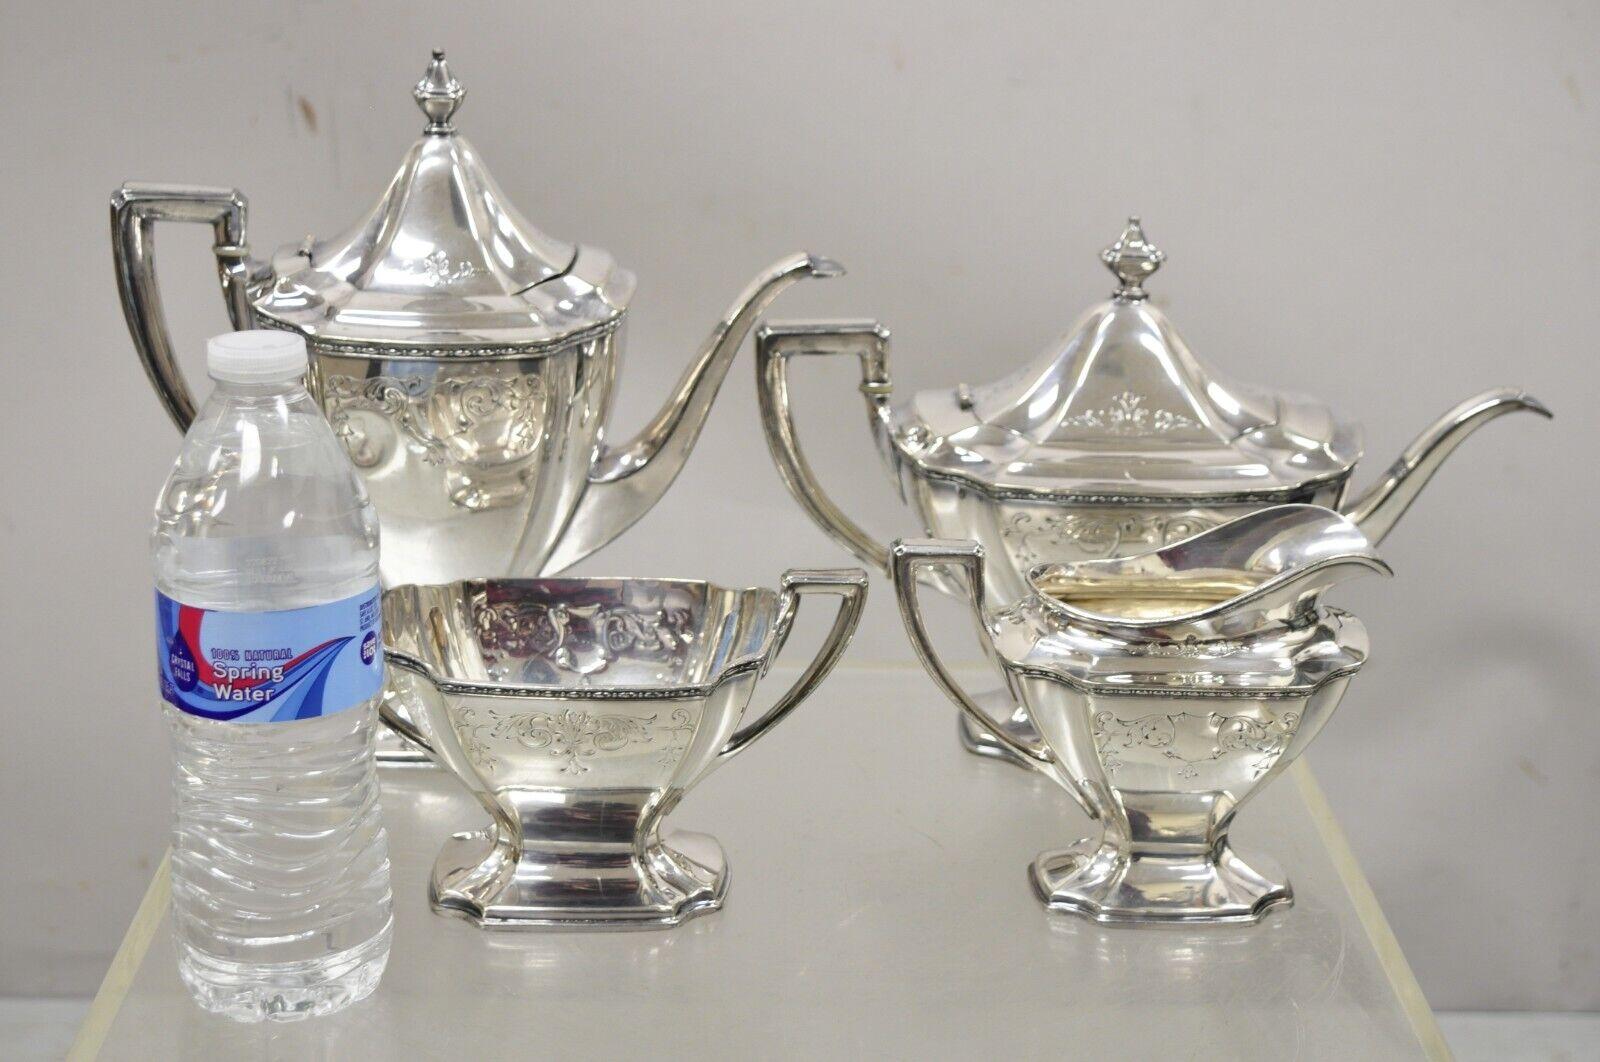 WD Smith Silver Co Chippendale EPNS Hepplewhite Silver Plated Tea Set - 4 pcs For Sale 2